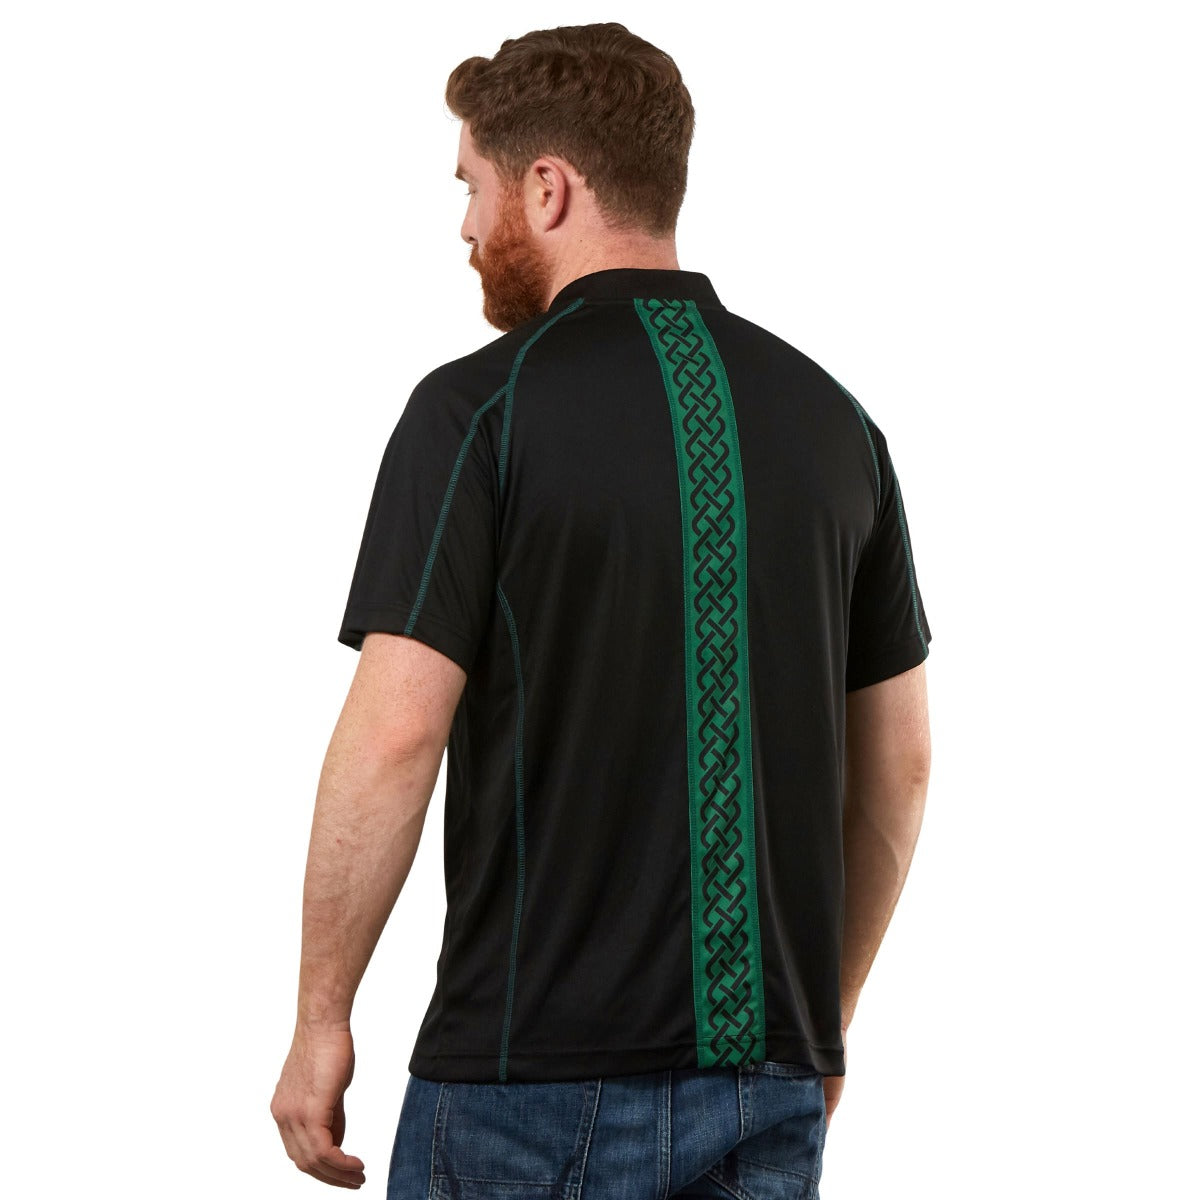 Guinness Black & Green Short Sleeve Rugby Jersey